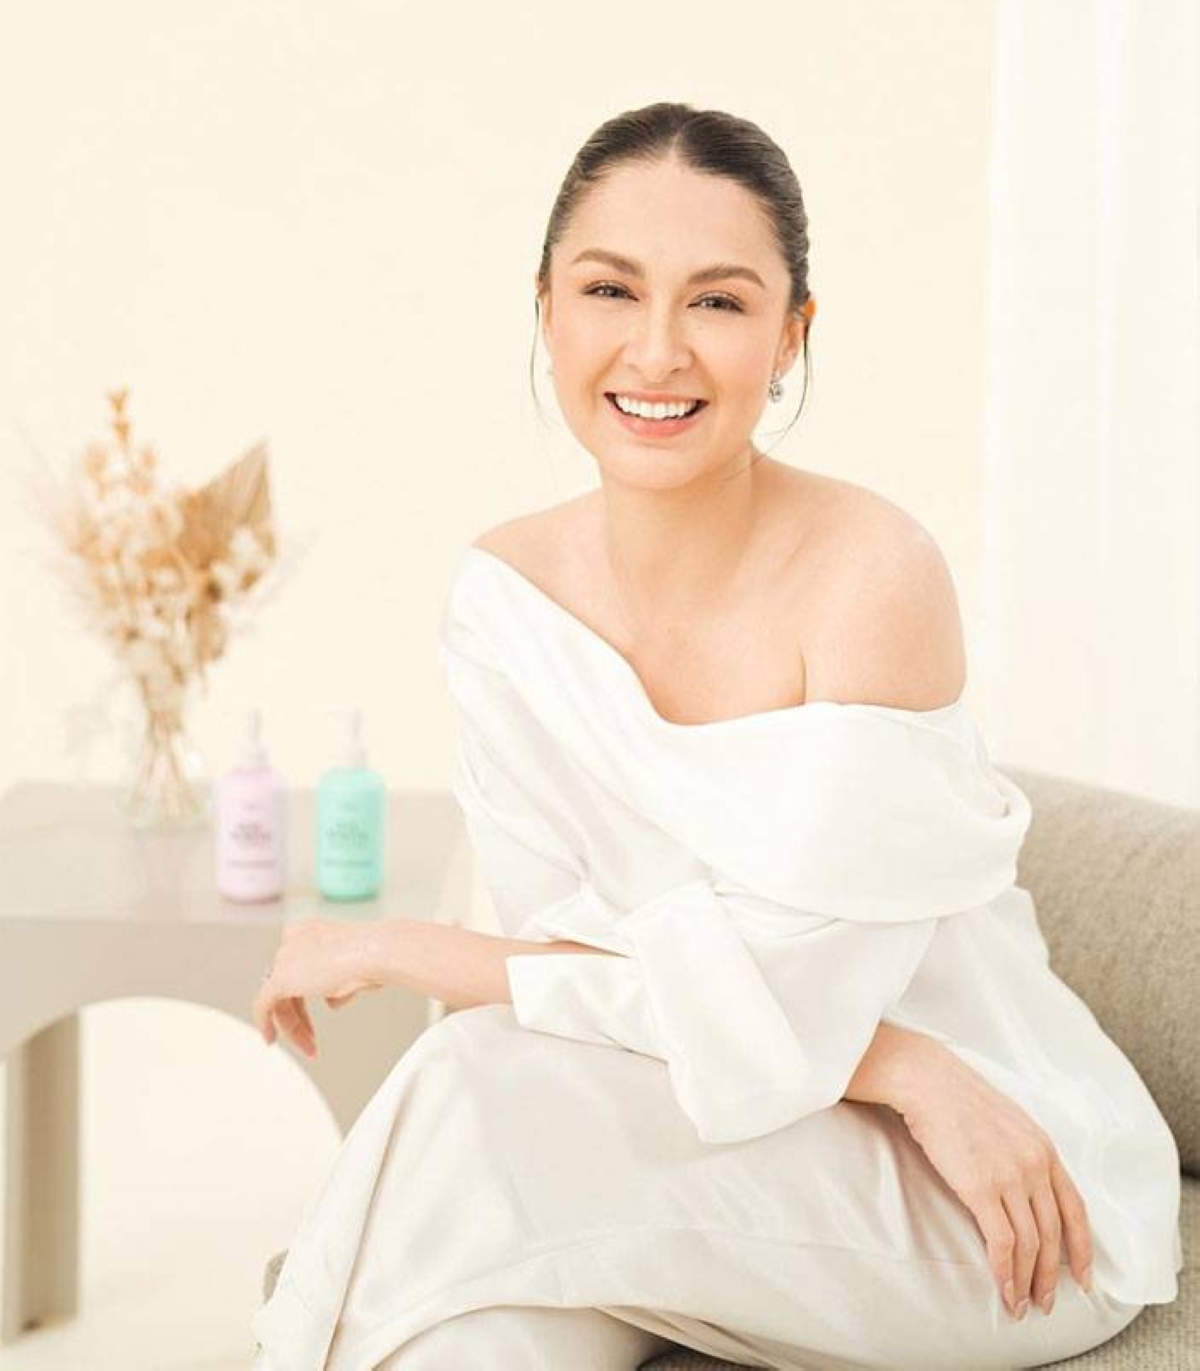 Anicoche-Tan and Rivera joined forces to develop a budget-friendly skincare line with the same professional-level skincare that Beautederm is expected to bring.